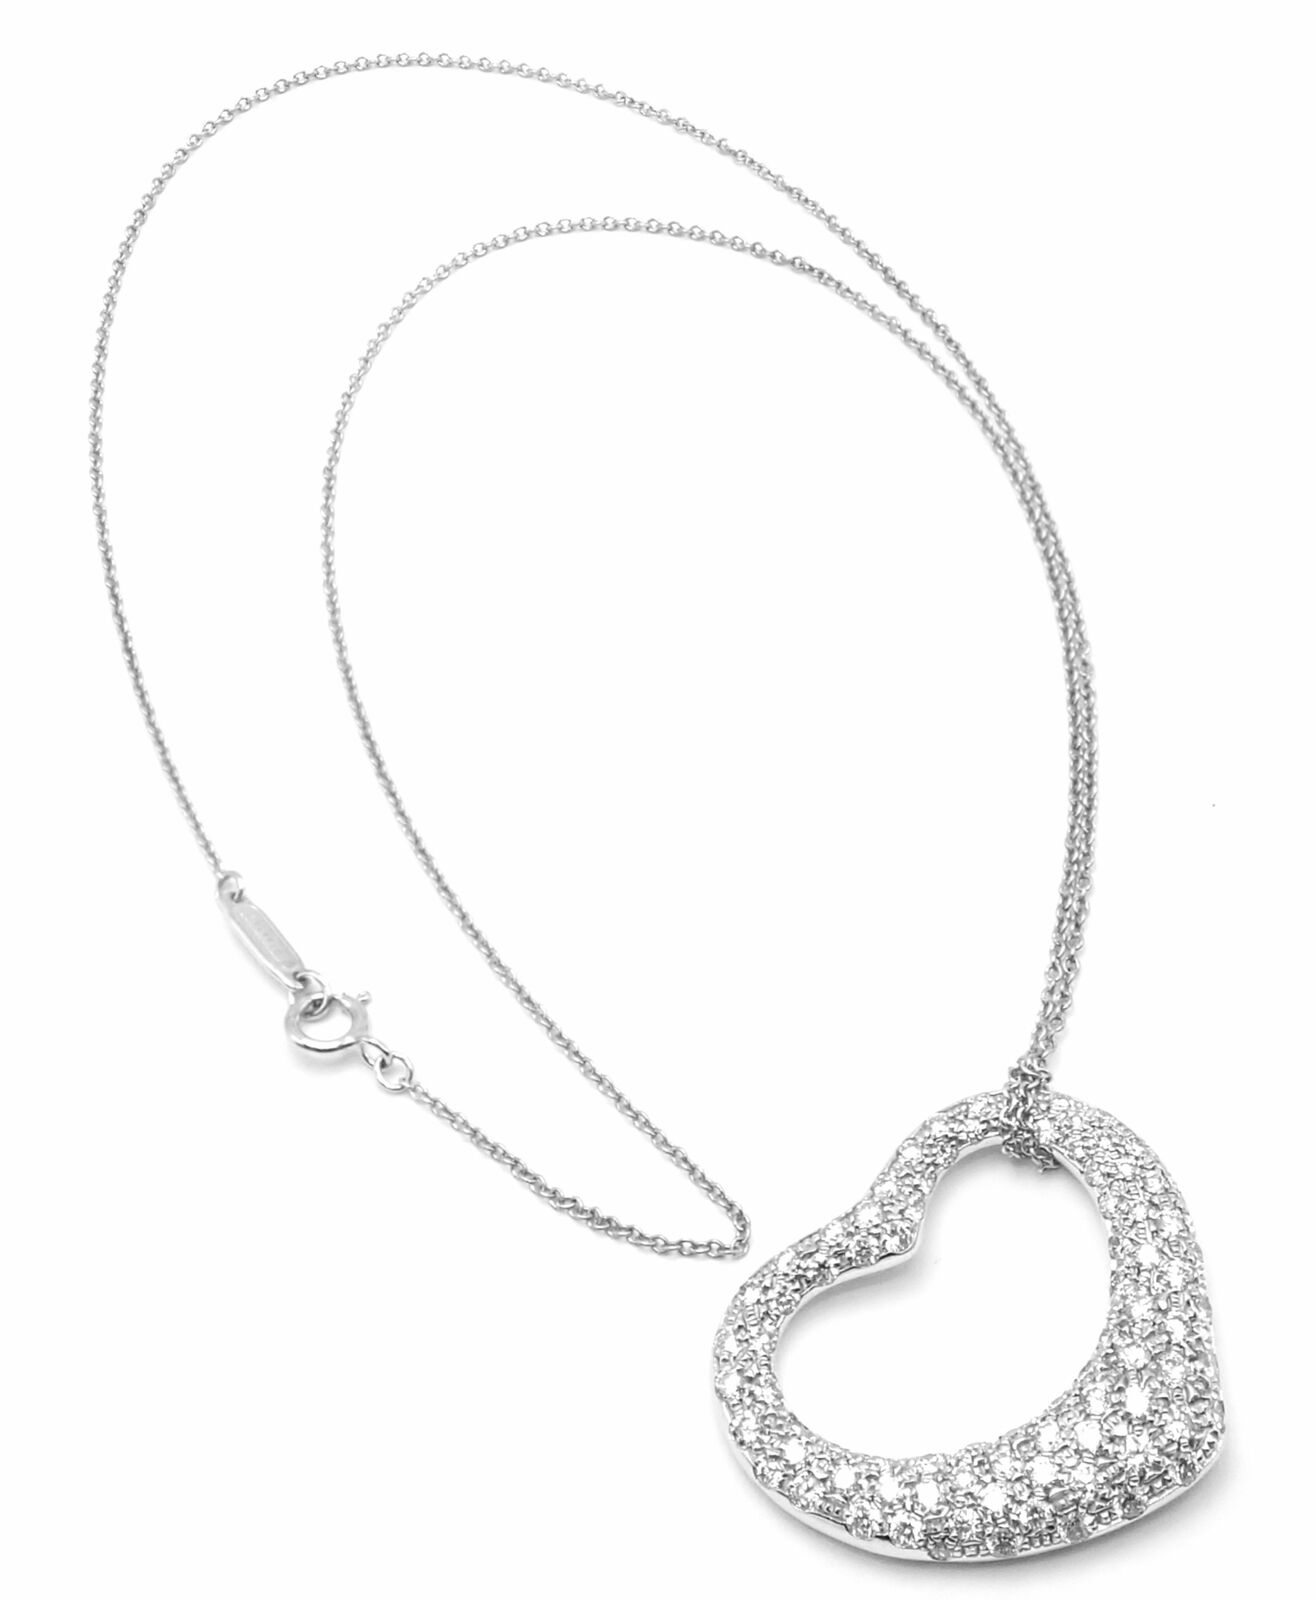 Tiffany & Co. Jewelry & Watches:Fine Jewelry:Necklaces & Pendants Authentic Tiffany & Co Peretti Platinum Diamond Large Open Heart Necklace $26000